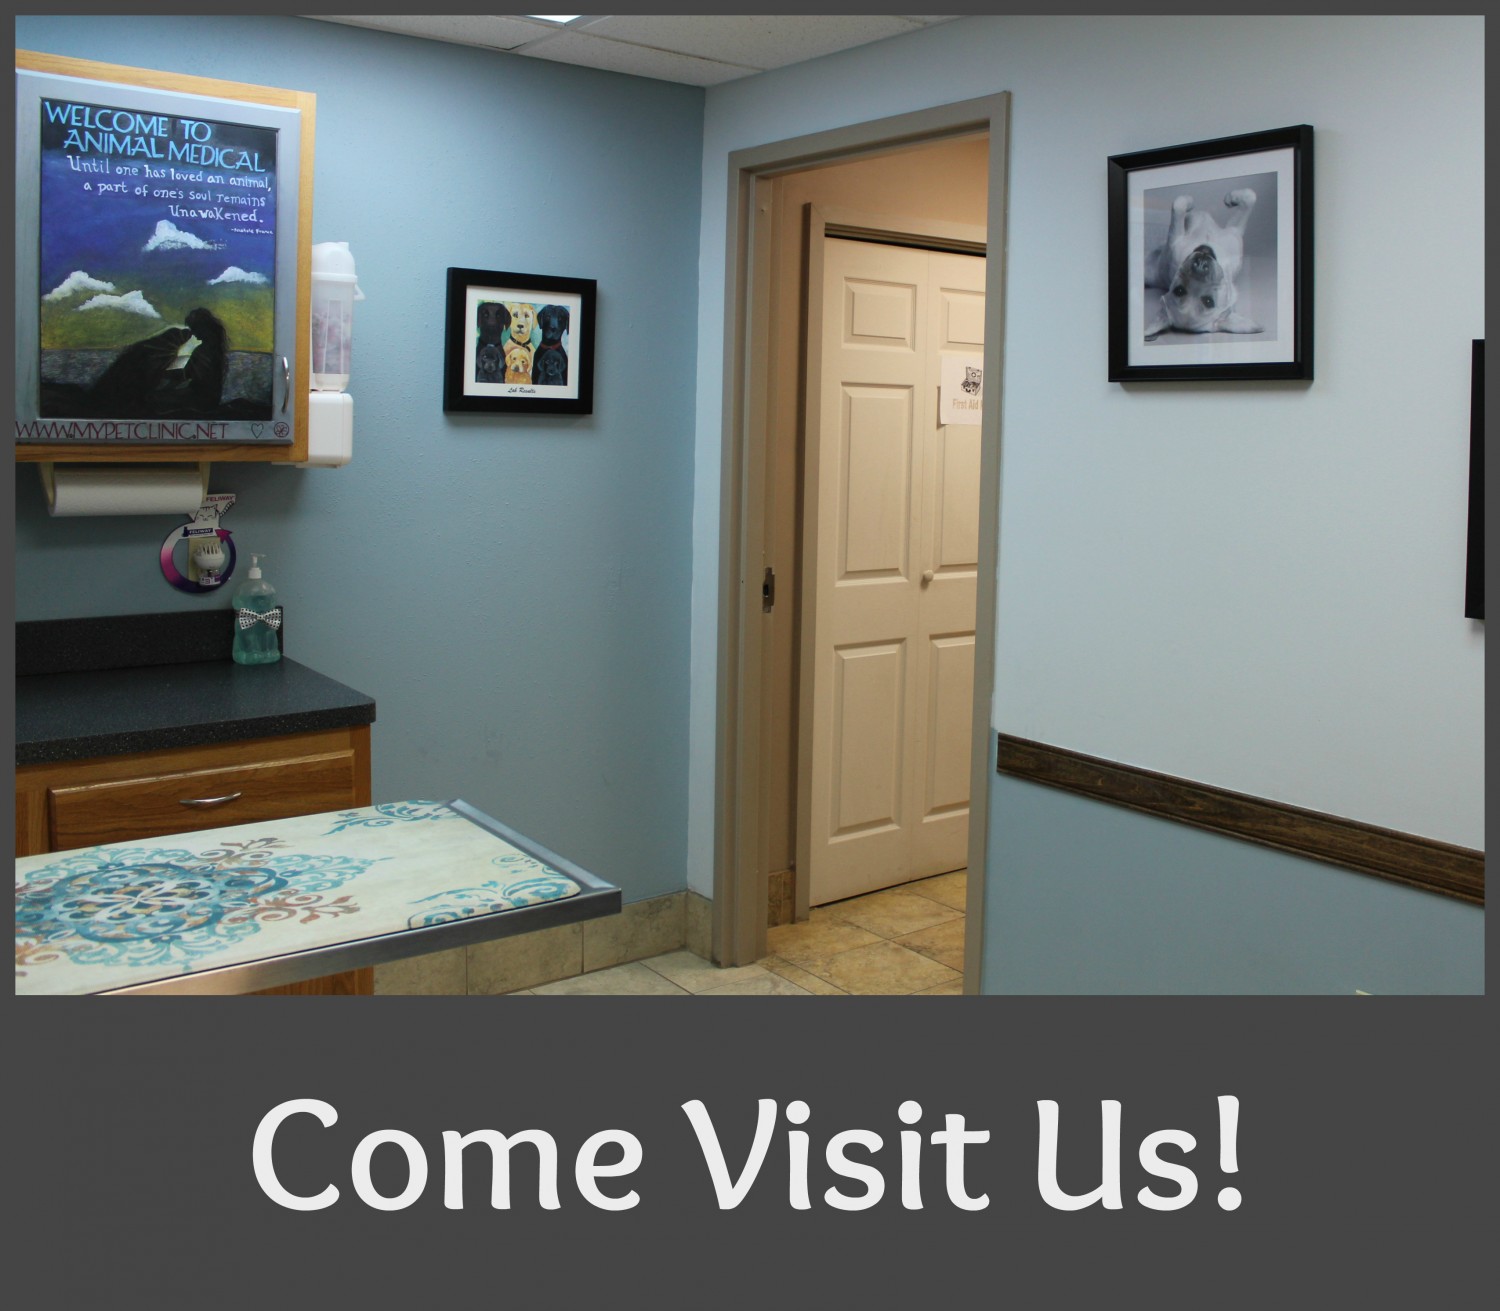 Animal Medical of Chesapeake Veterinary Hospital, 921 Battlefield Blvd, Chesapeake, Va 23320 welcomes you to visit us and leave a Review